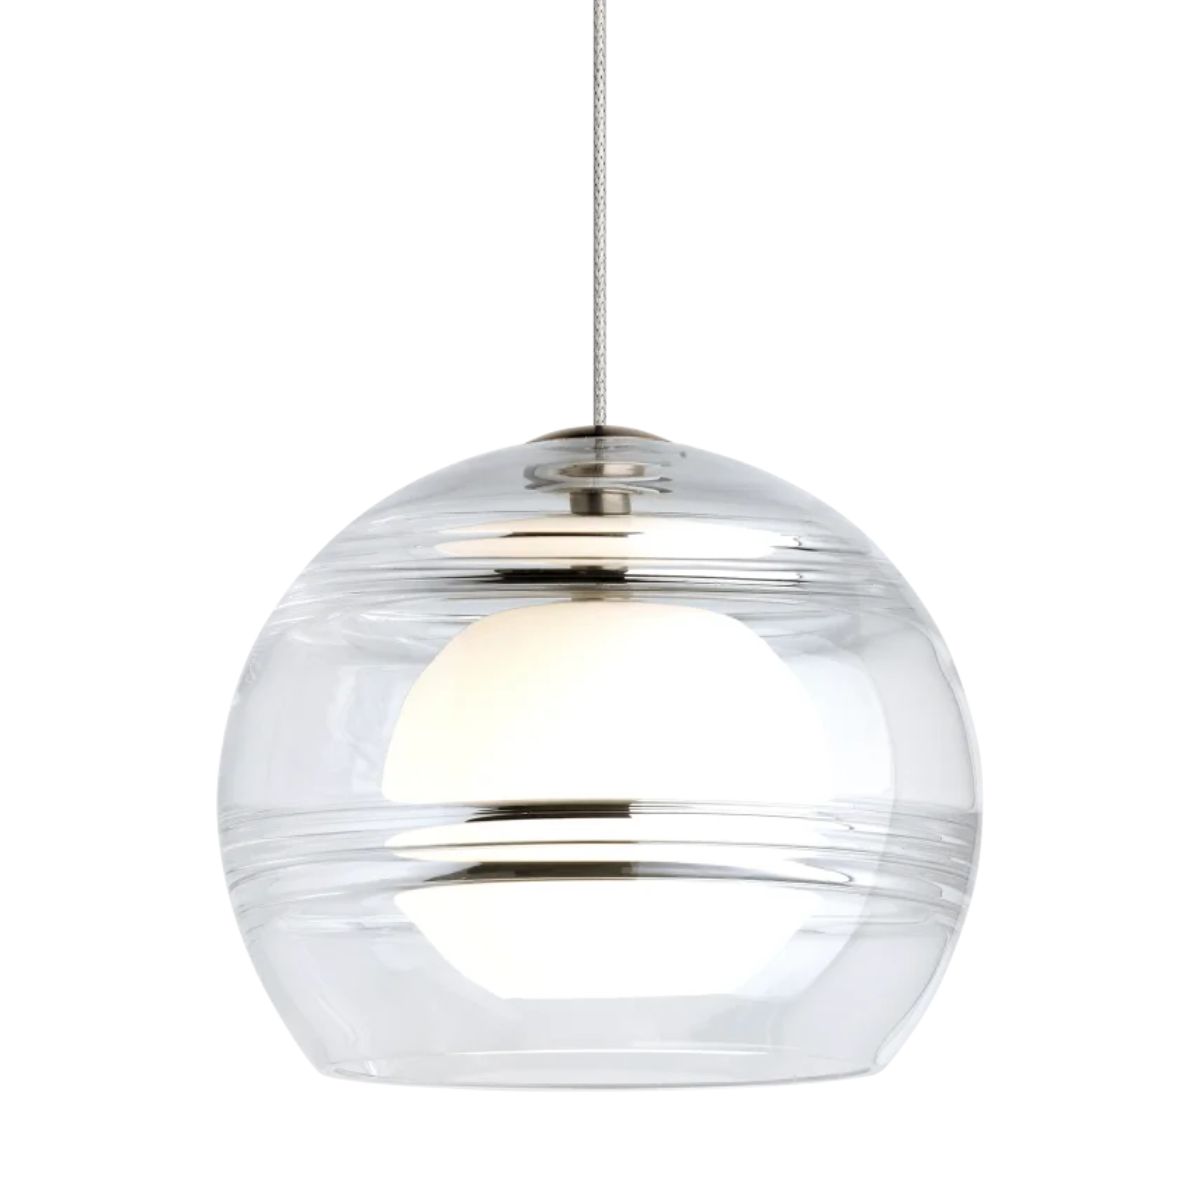 Sedona 6 in. Monorail Halogen Pendant Light Satin Nickel finish with Clear glass